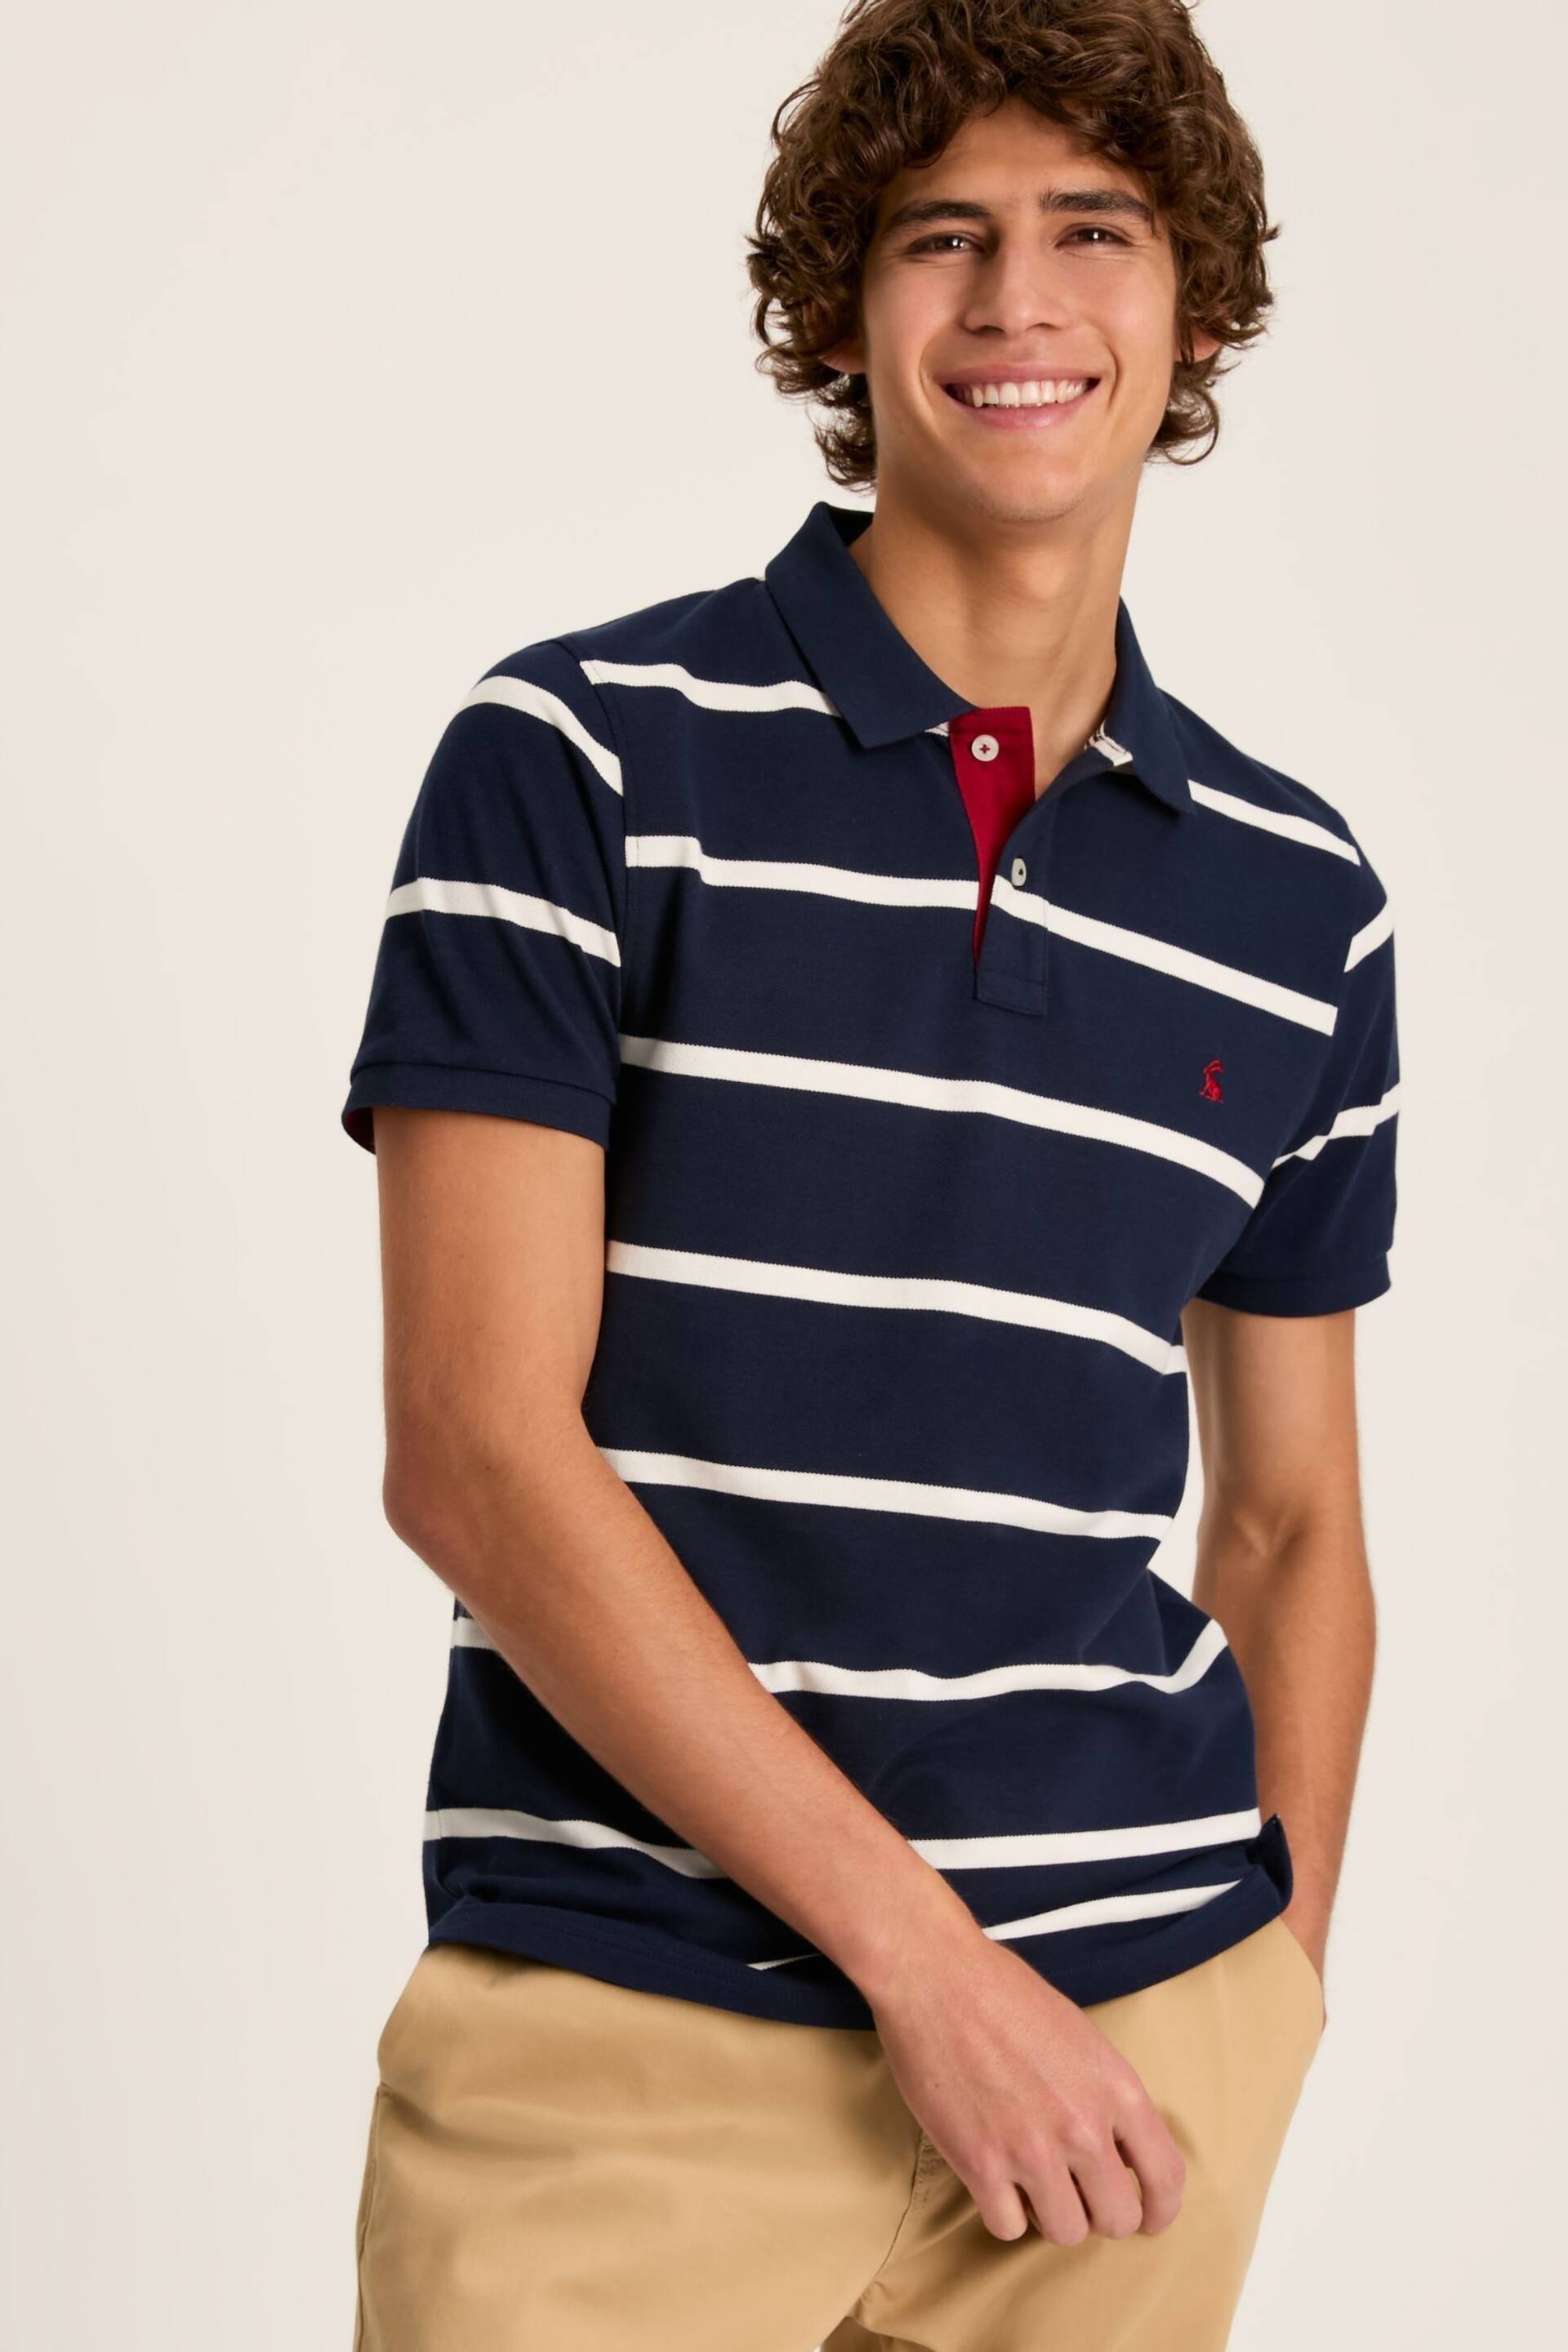 Joules Filbert Navy/White Slim Fit Striped Polo Shirt - Image 1 of 8